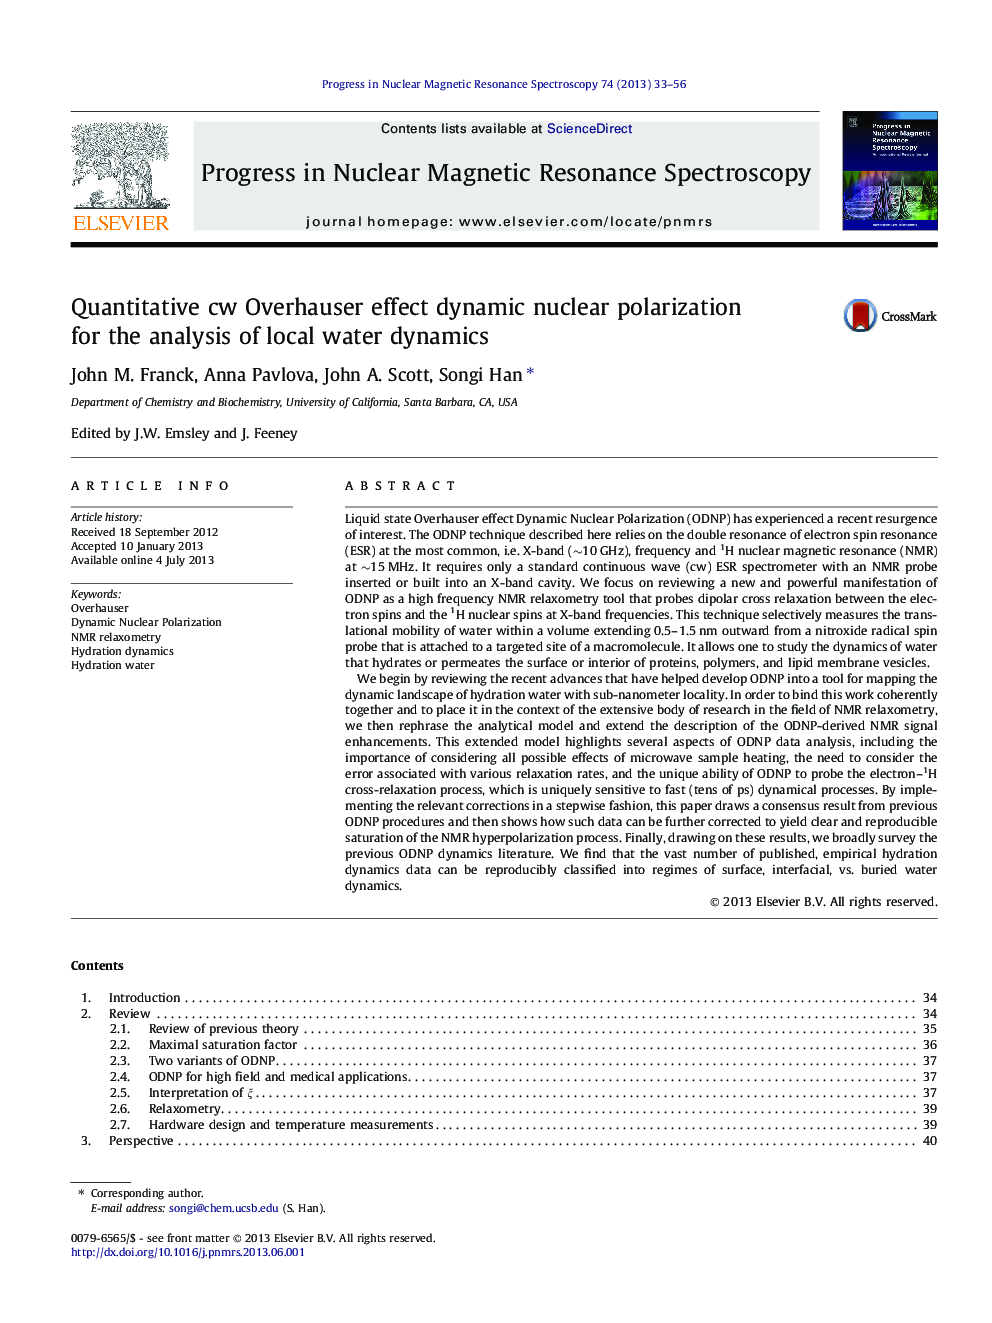 Quantitative cw Overhauser effect dynamic nuclear polarization for the analysis of local water dynamics